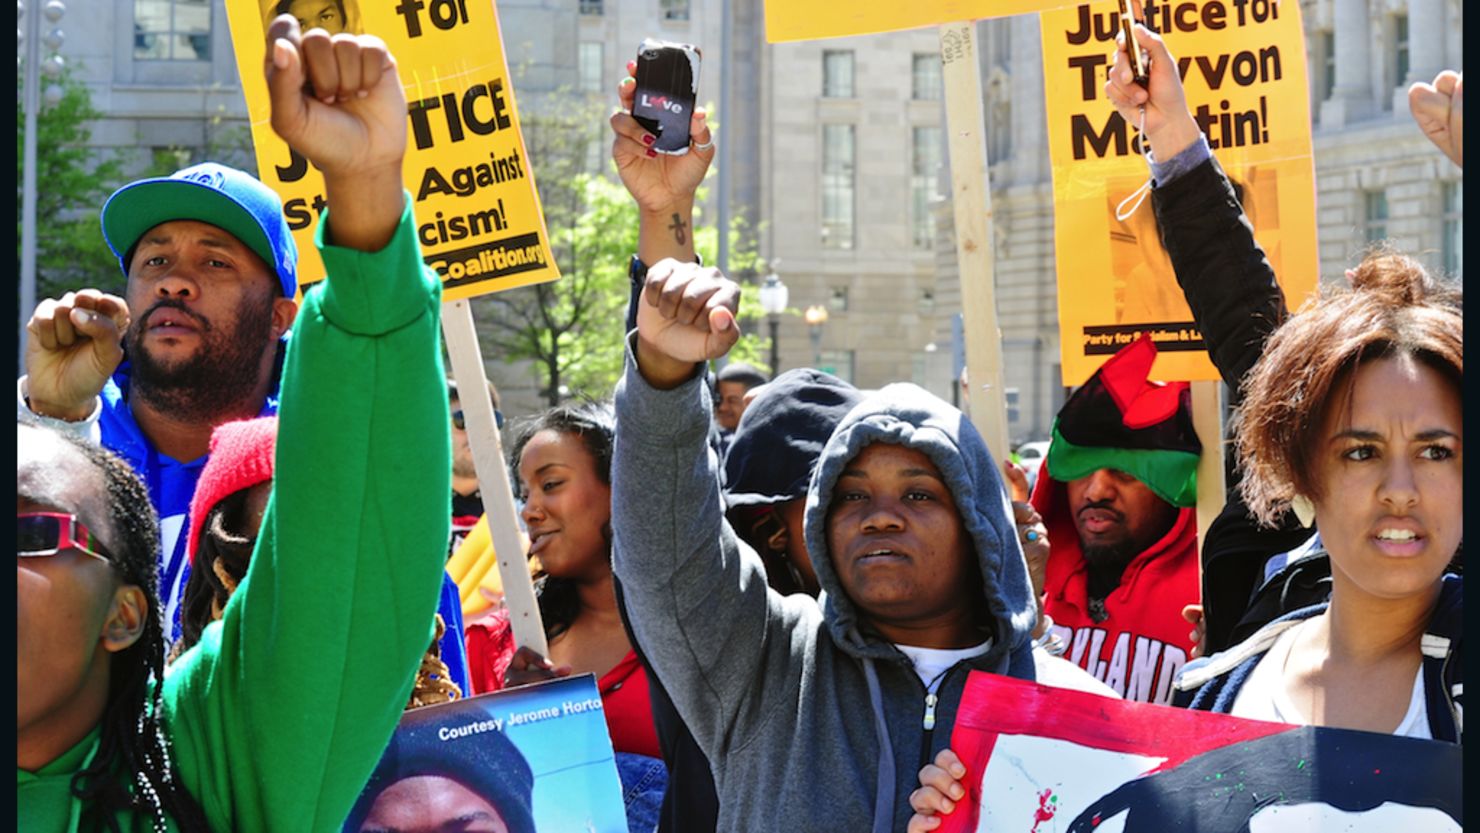 Activists march last week in Washington demanding justice in the death of Trayvon Martin.